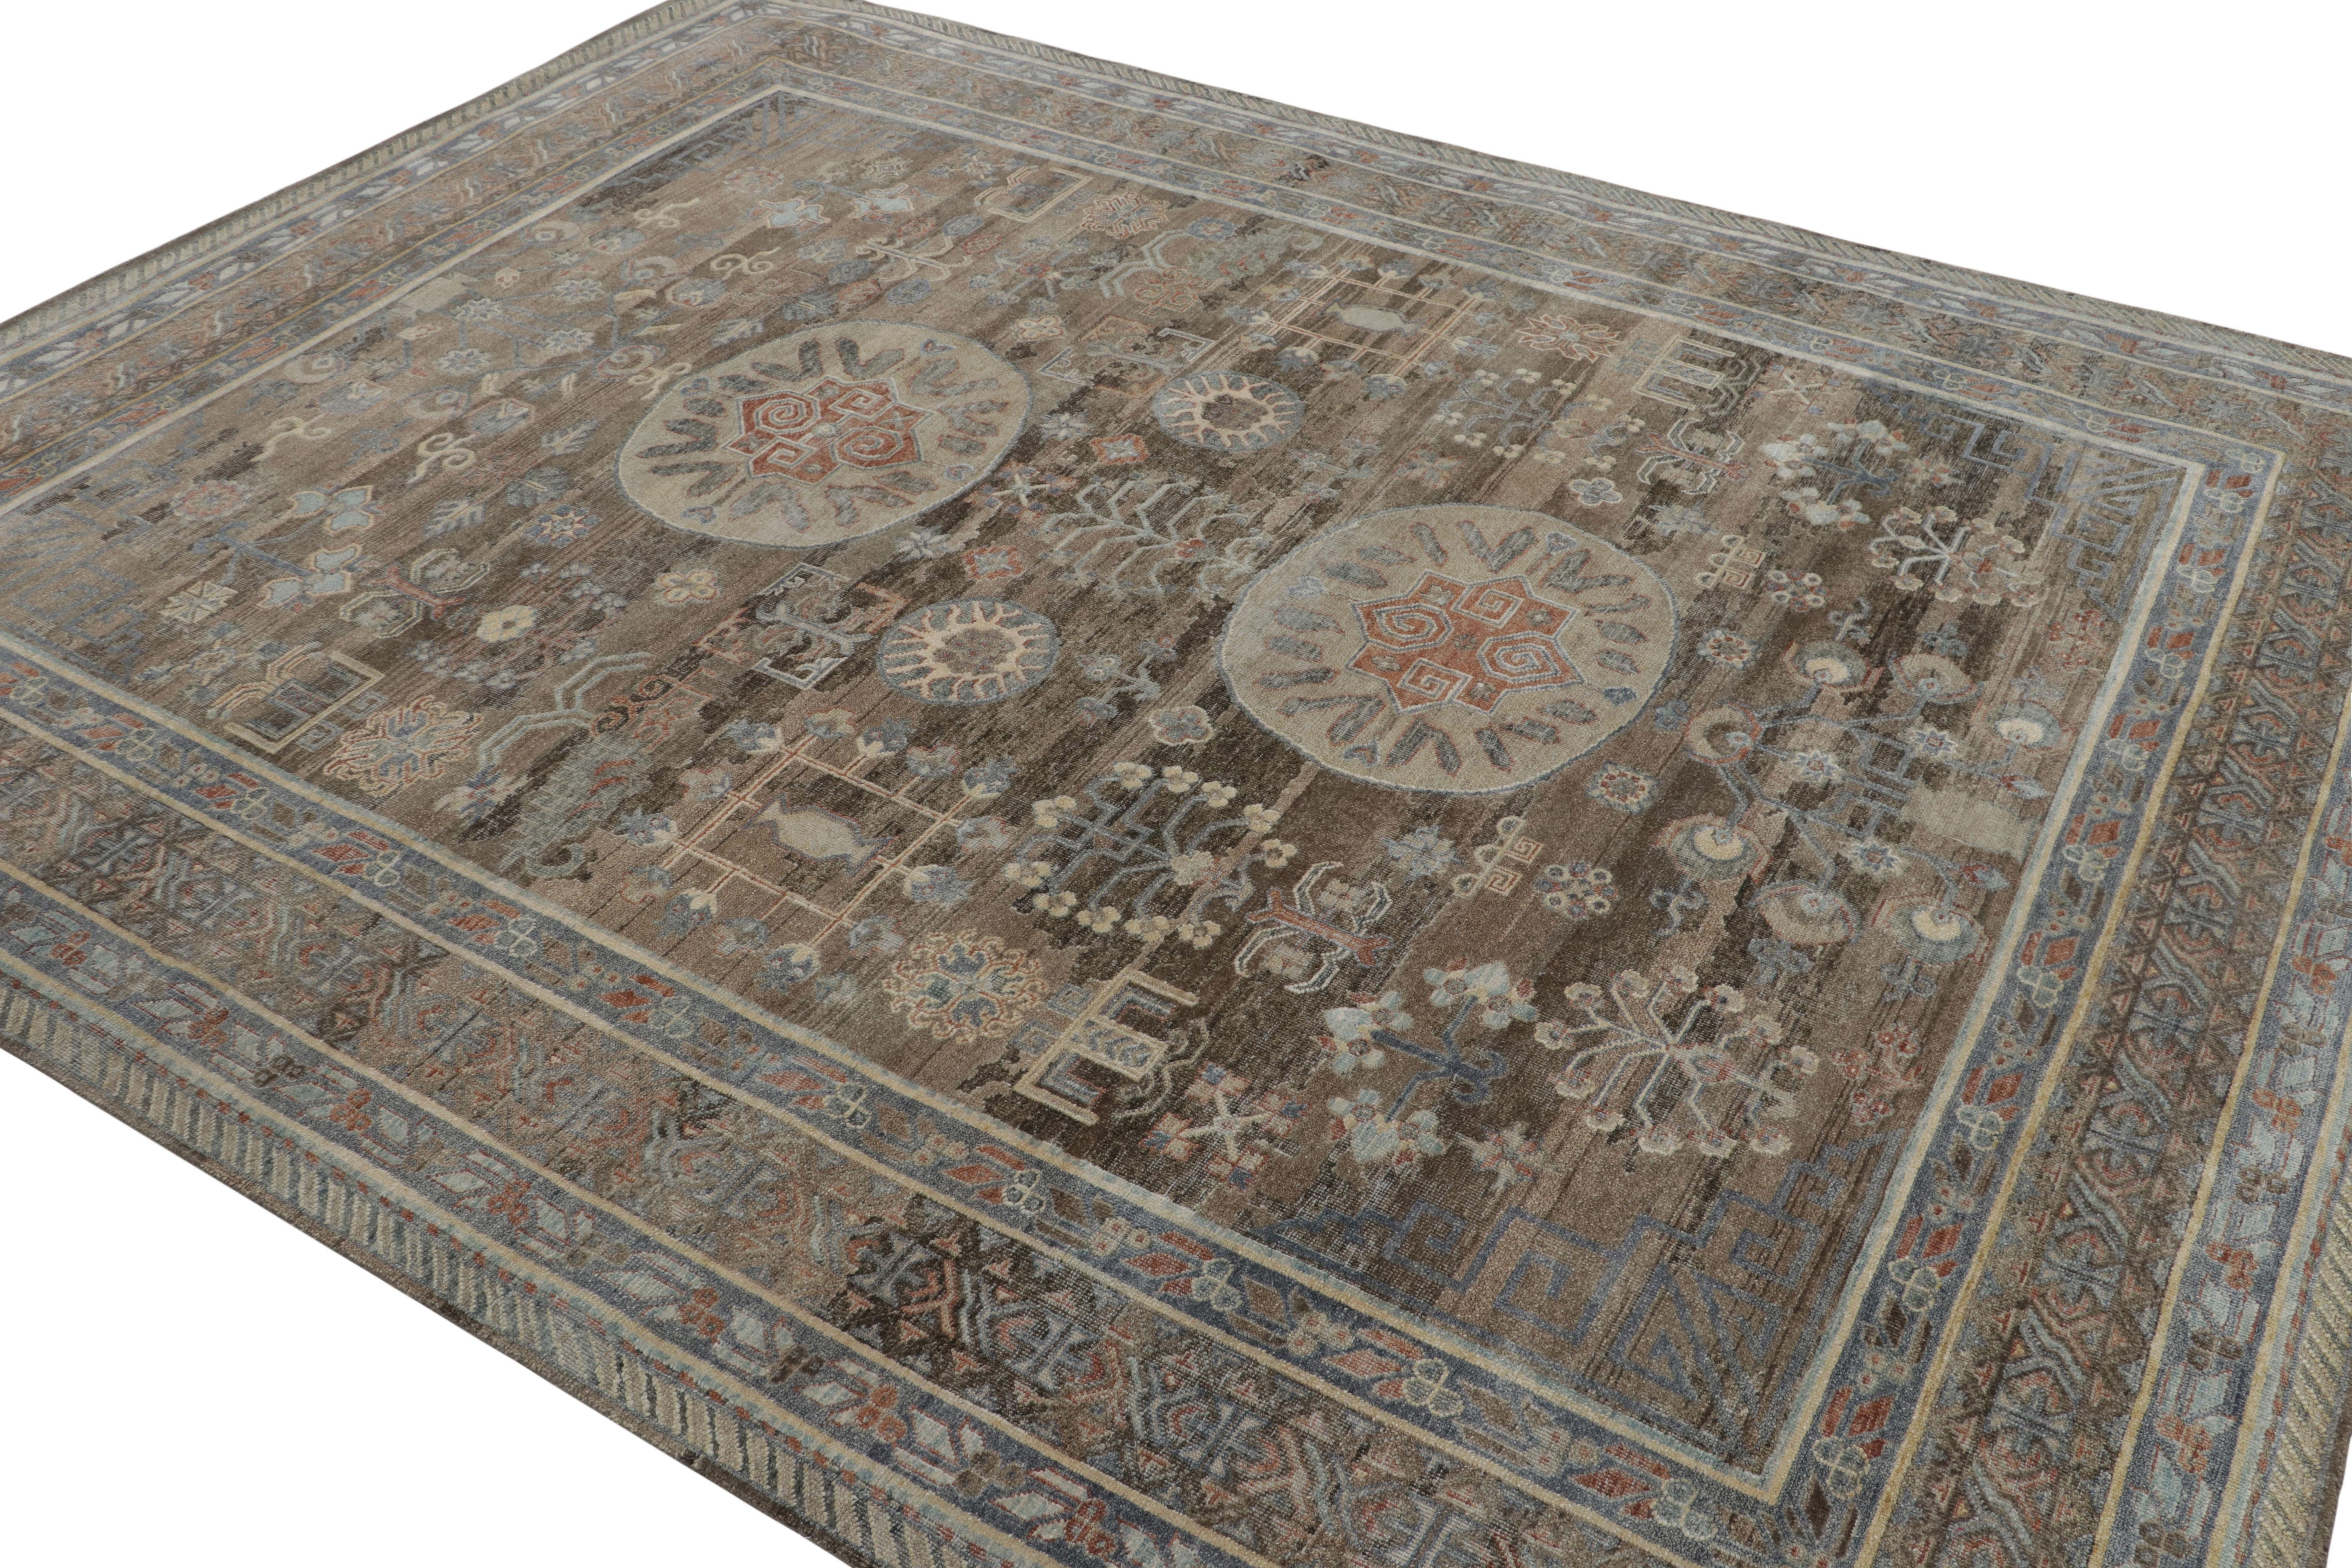 Hand-Knotted Rug & Kilim’s Khotan Rug in Brown, Red and Blue with Medallion Patterns For Sale